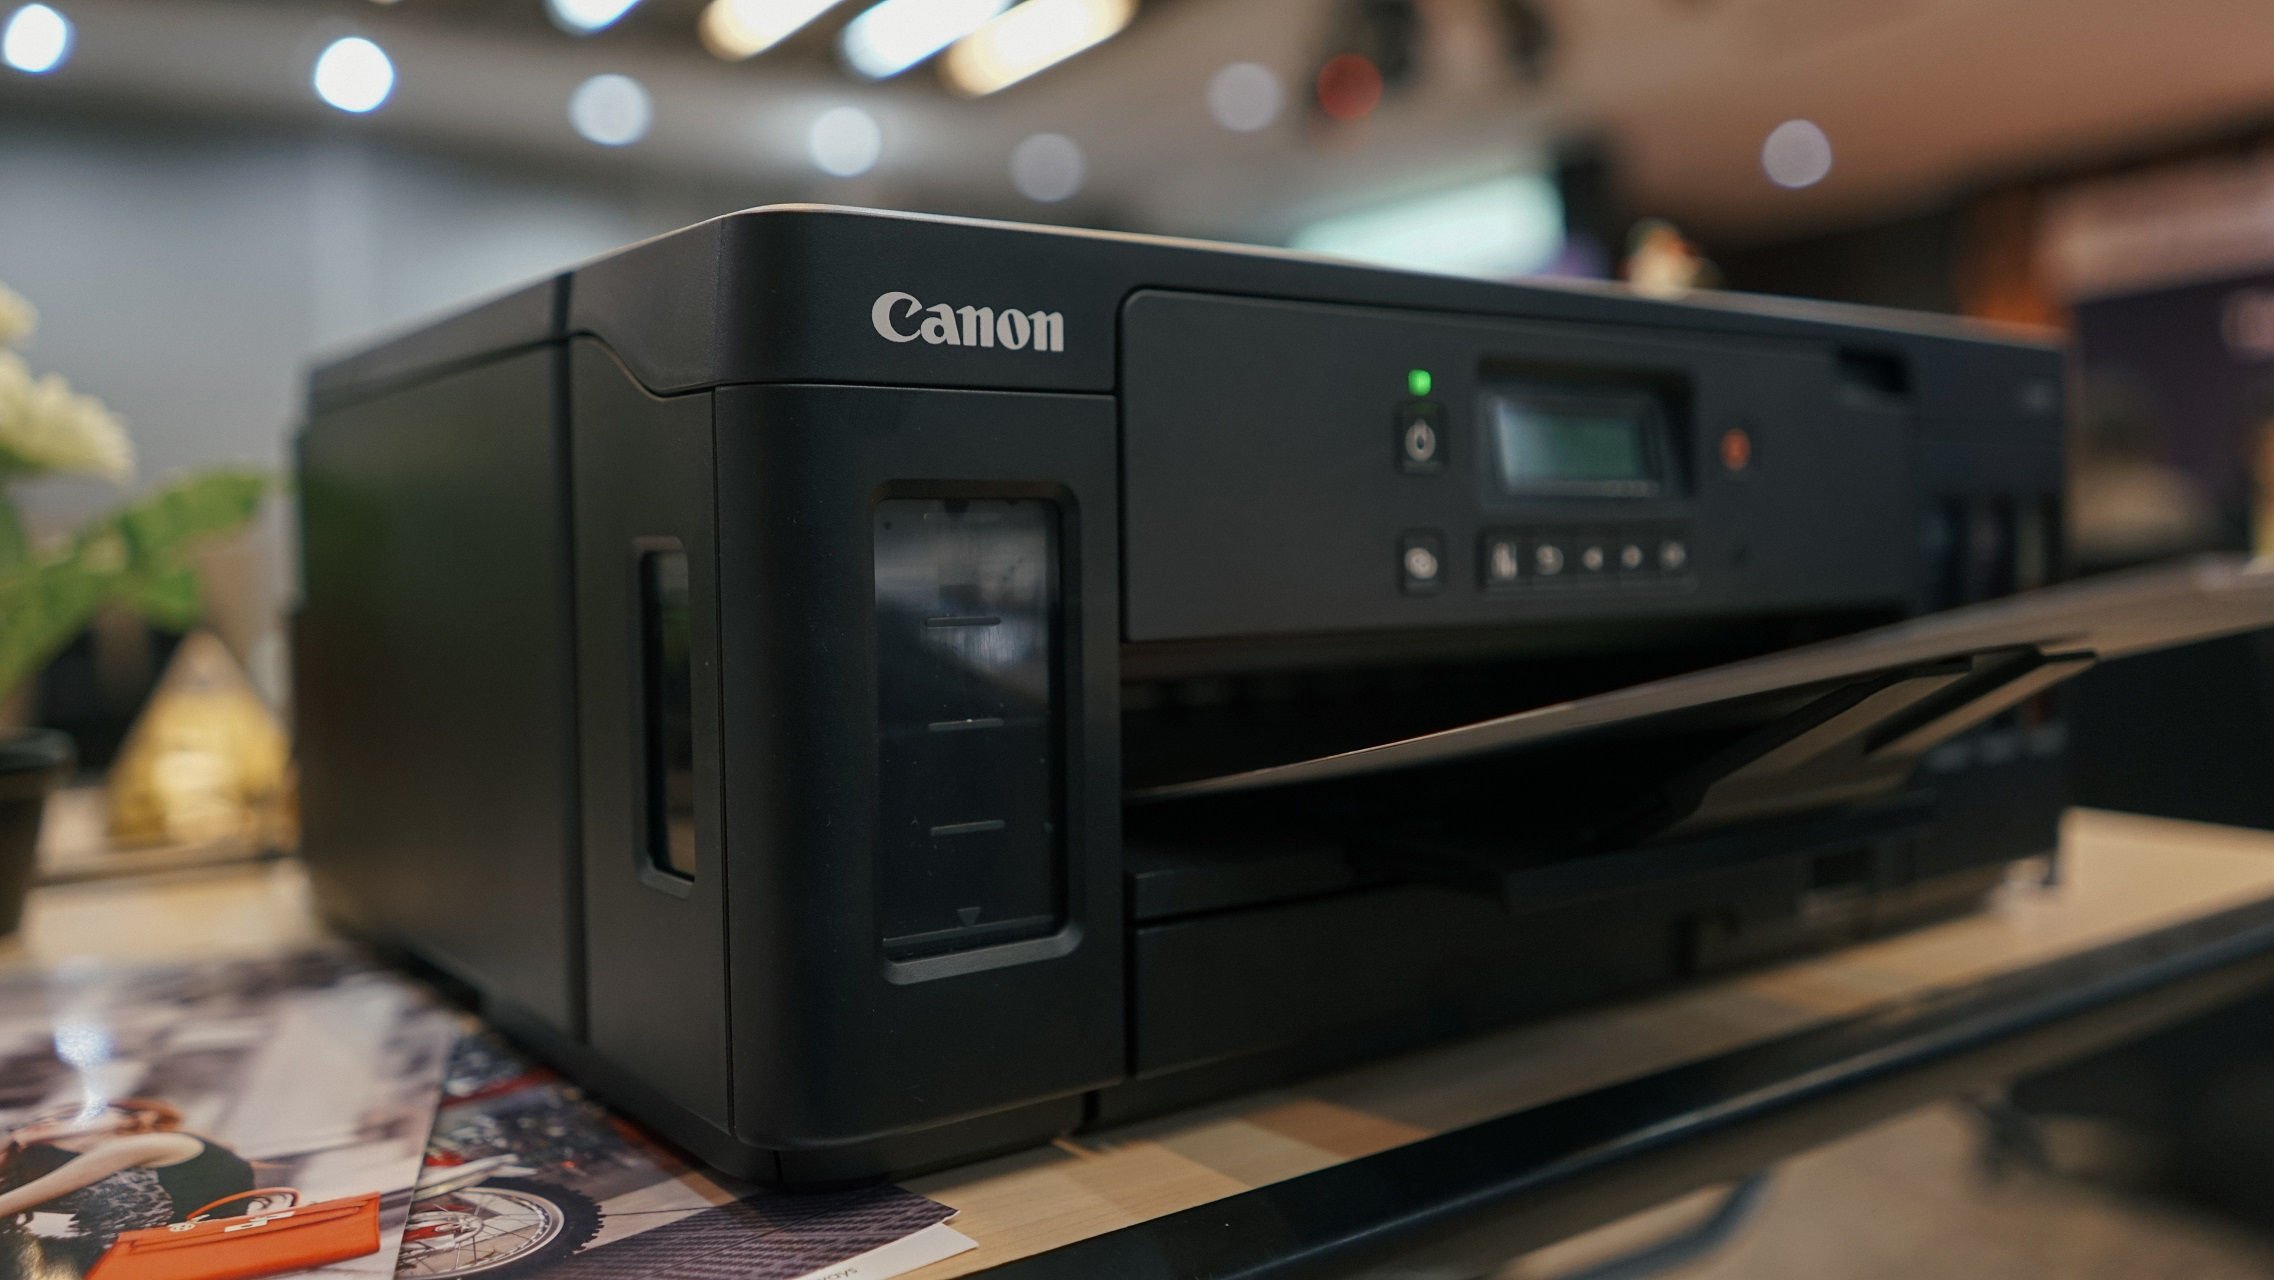 <b>How To Install Canon Mf Scan Utility</b>0″ loading=”lazy” style=”width:100%;text-align:center;” onerror=”this.onerror=null;this.src=’https://tse1.mm.bing.net/th?q=how+to+install+canon+mf+scan+utility0;'” /><small style=